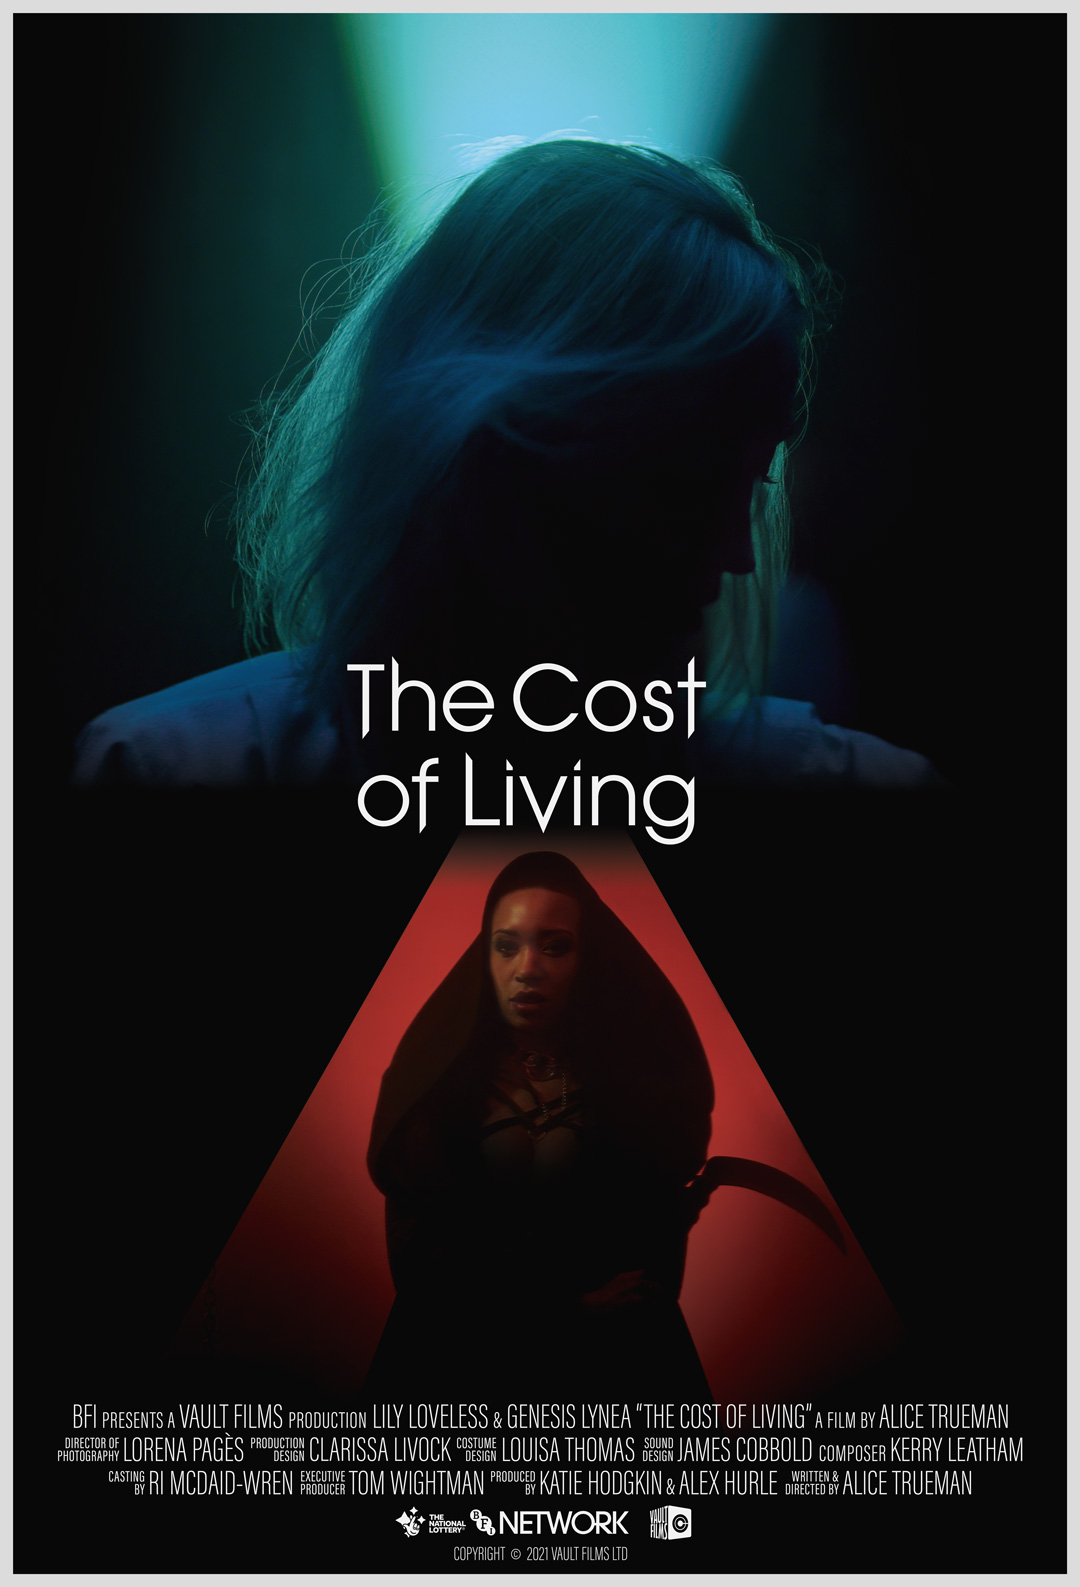 The cost of living film poster showing main caracters in contrasting lights